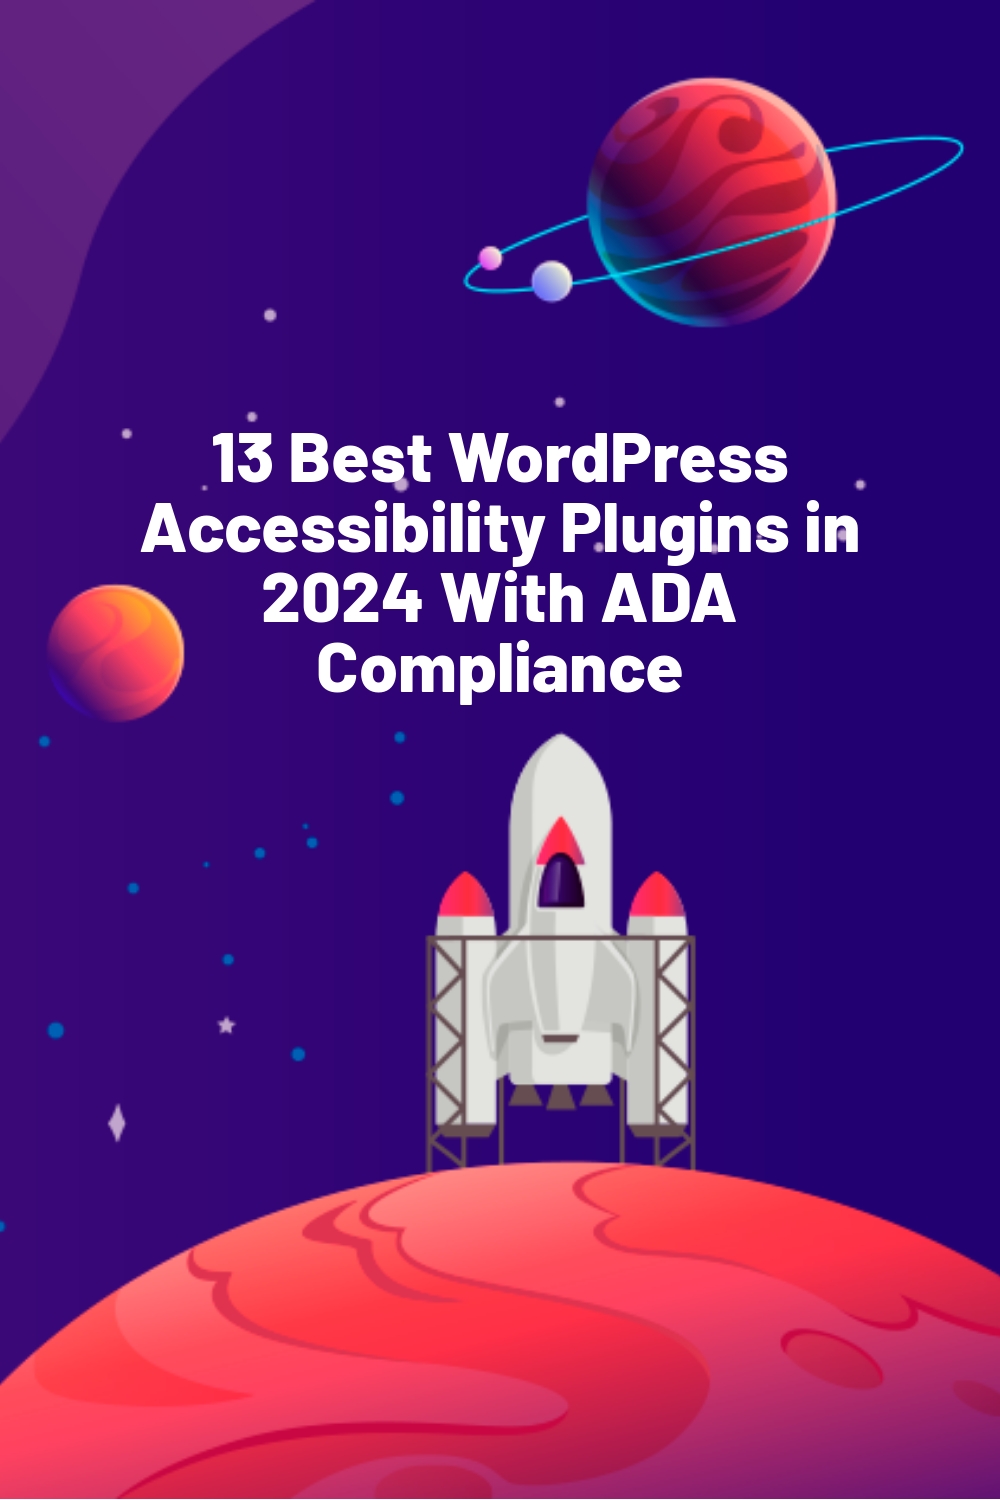 13 Best WordPress Accessibility Plugins in 2024 With ADA Compliance